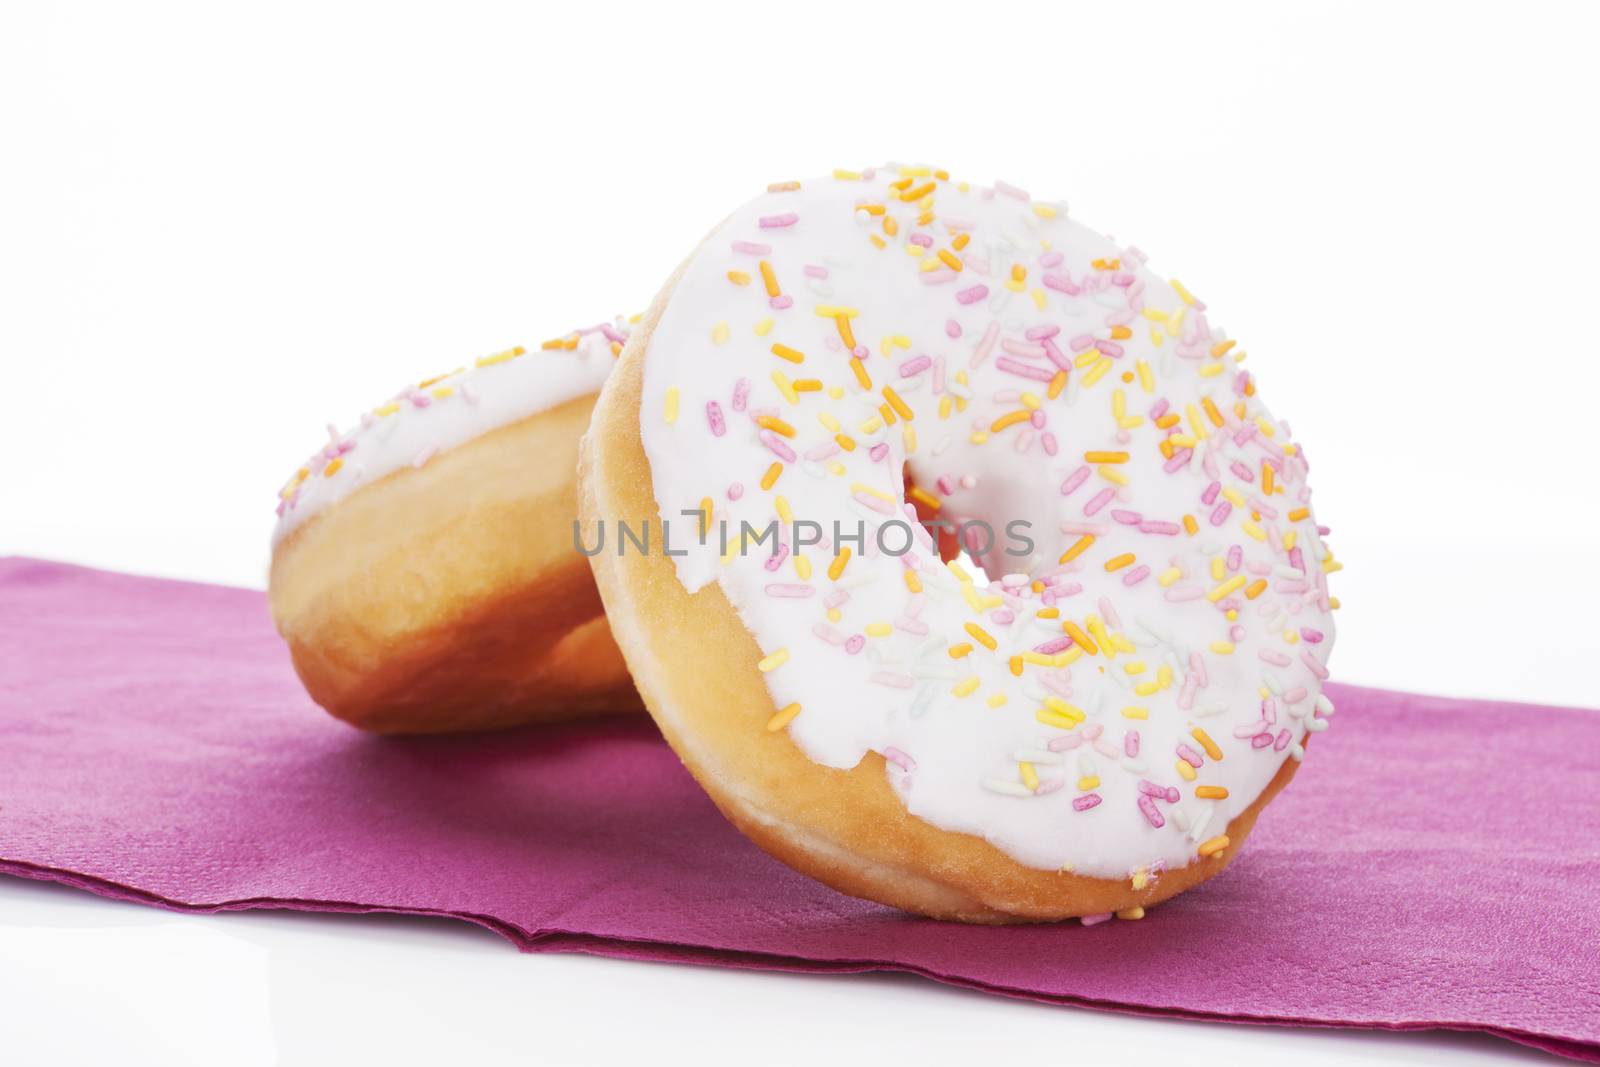 Colorful donuts on kitchen cloth on white background. Sweet dessert concept.